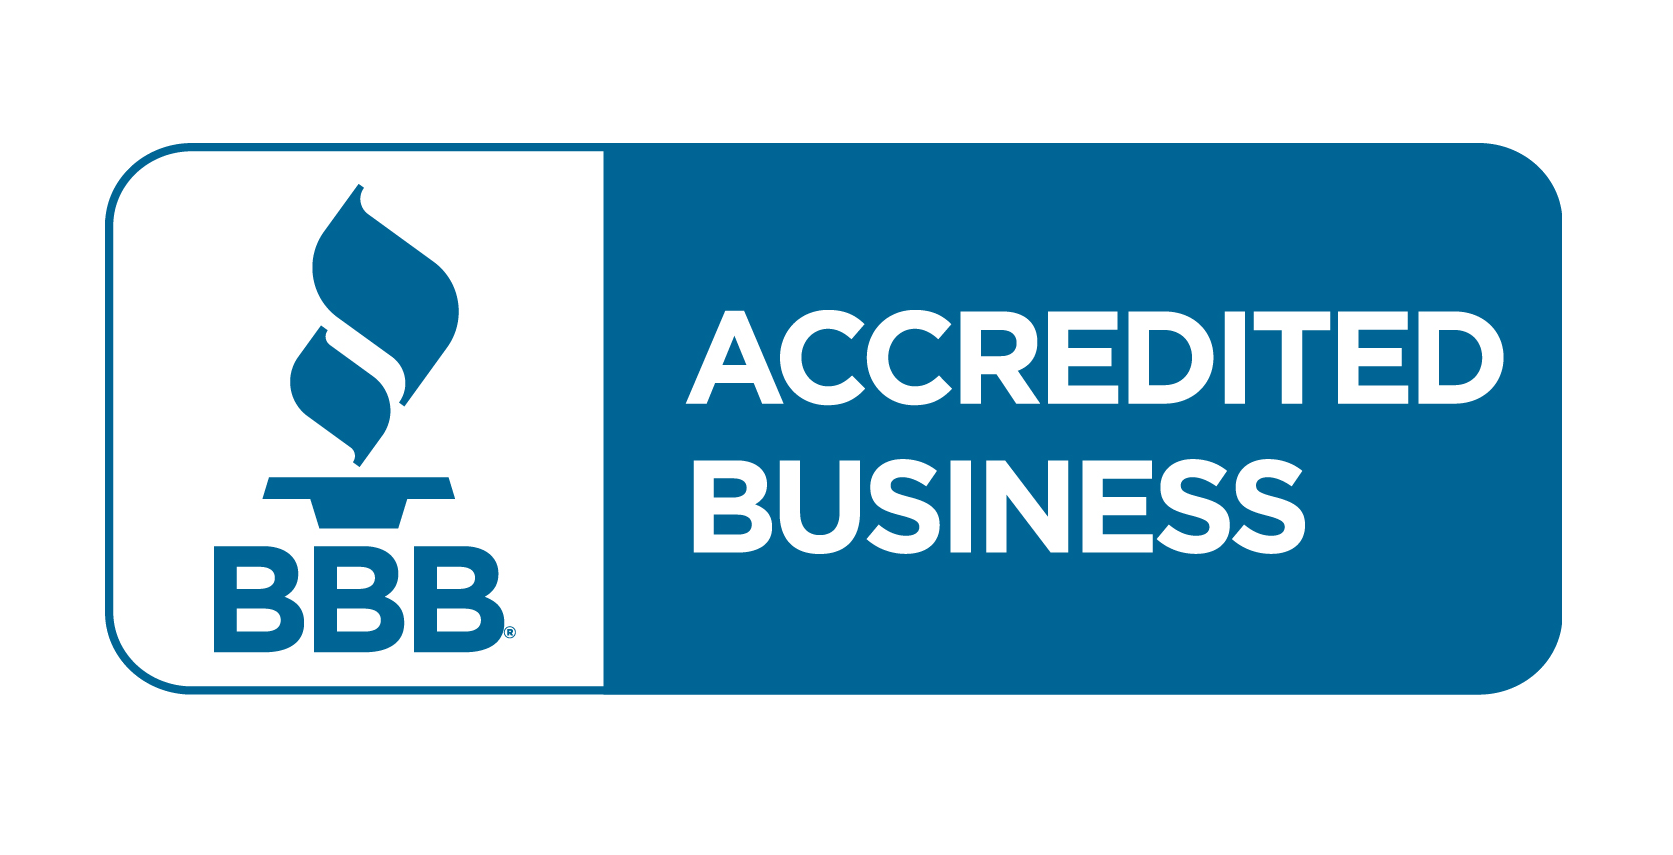 WestPro is BBB accredited